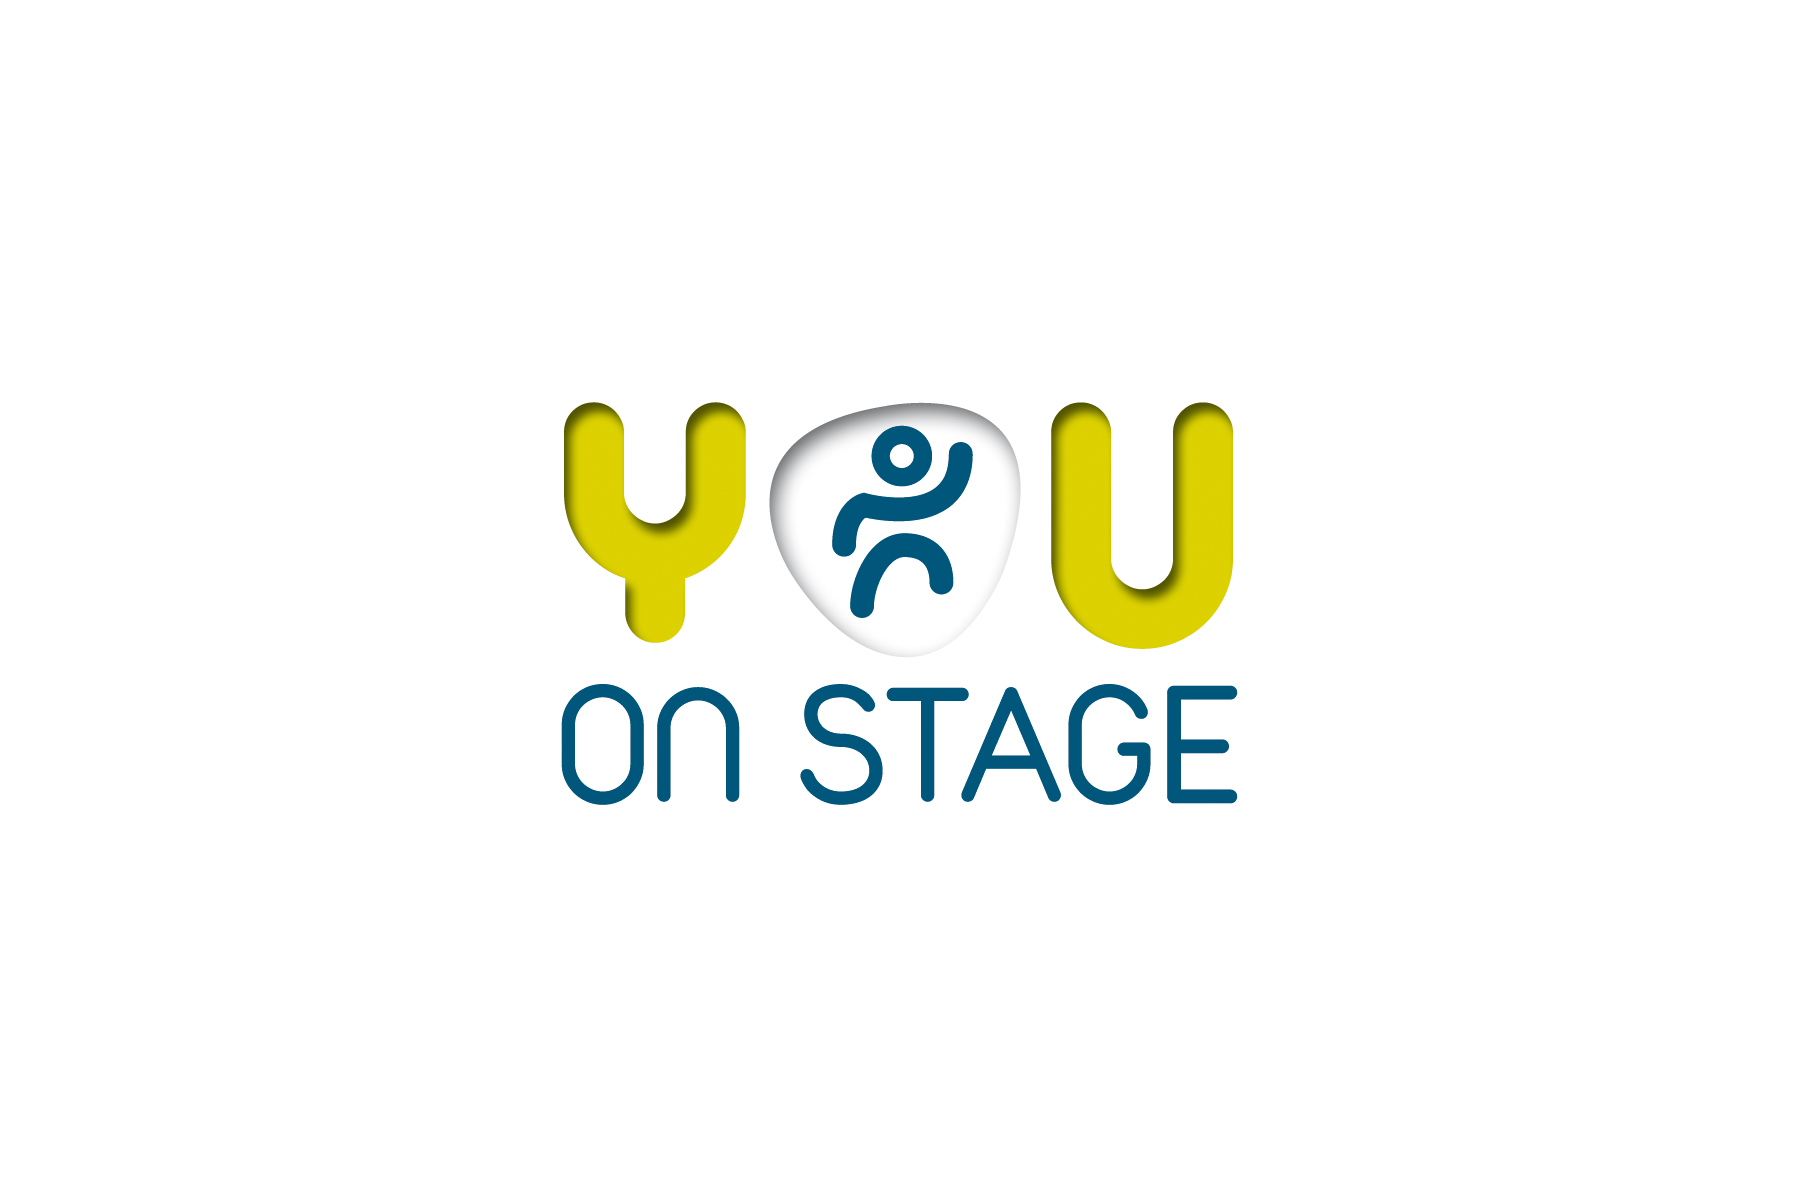 You on stage